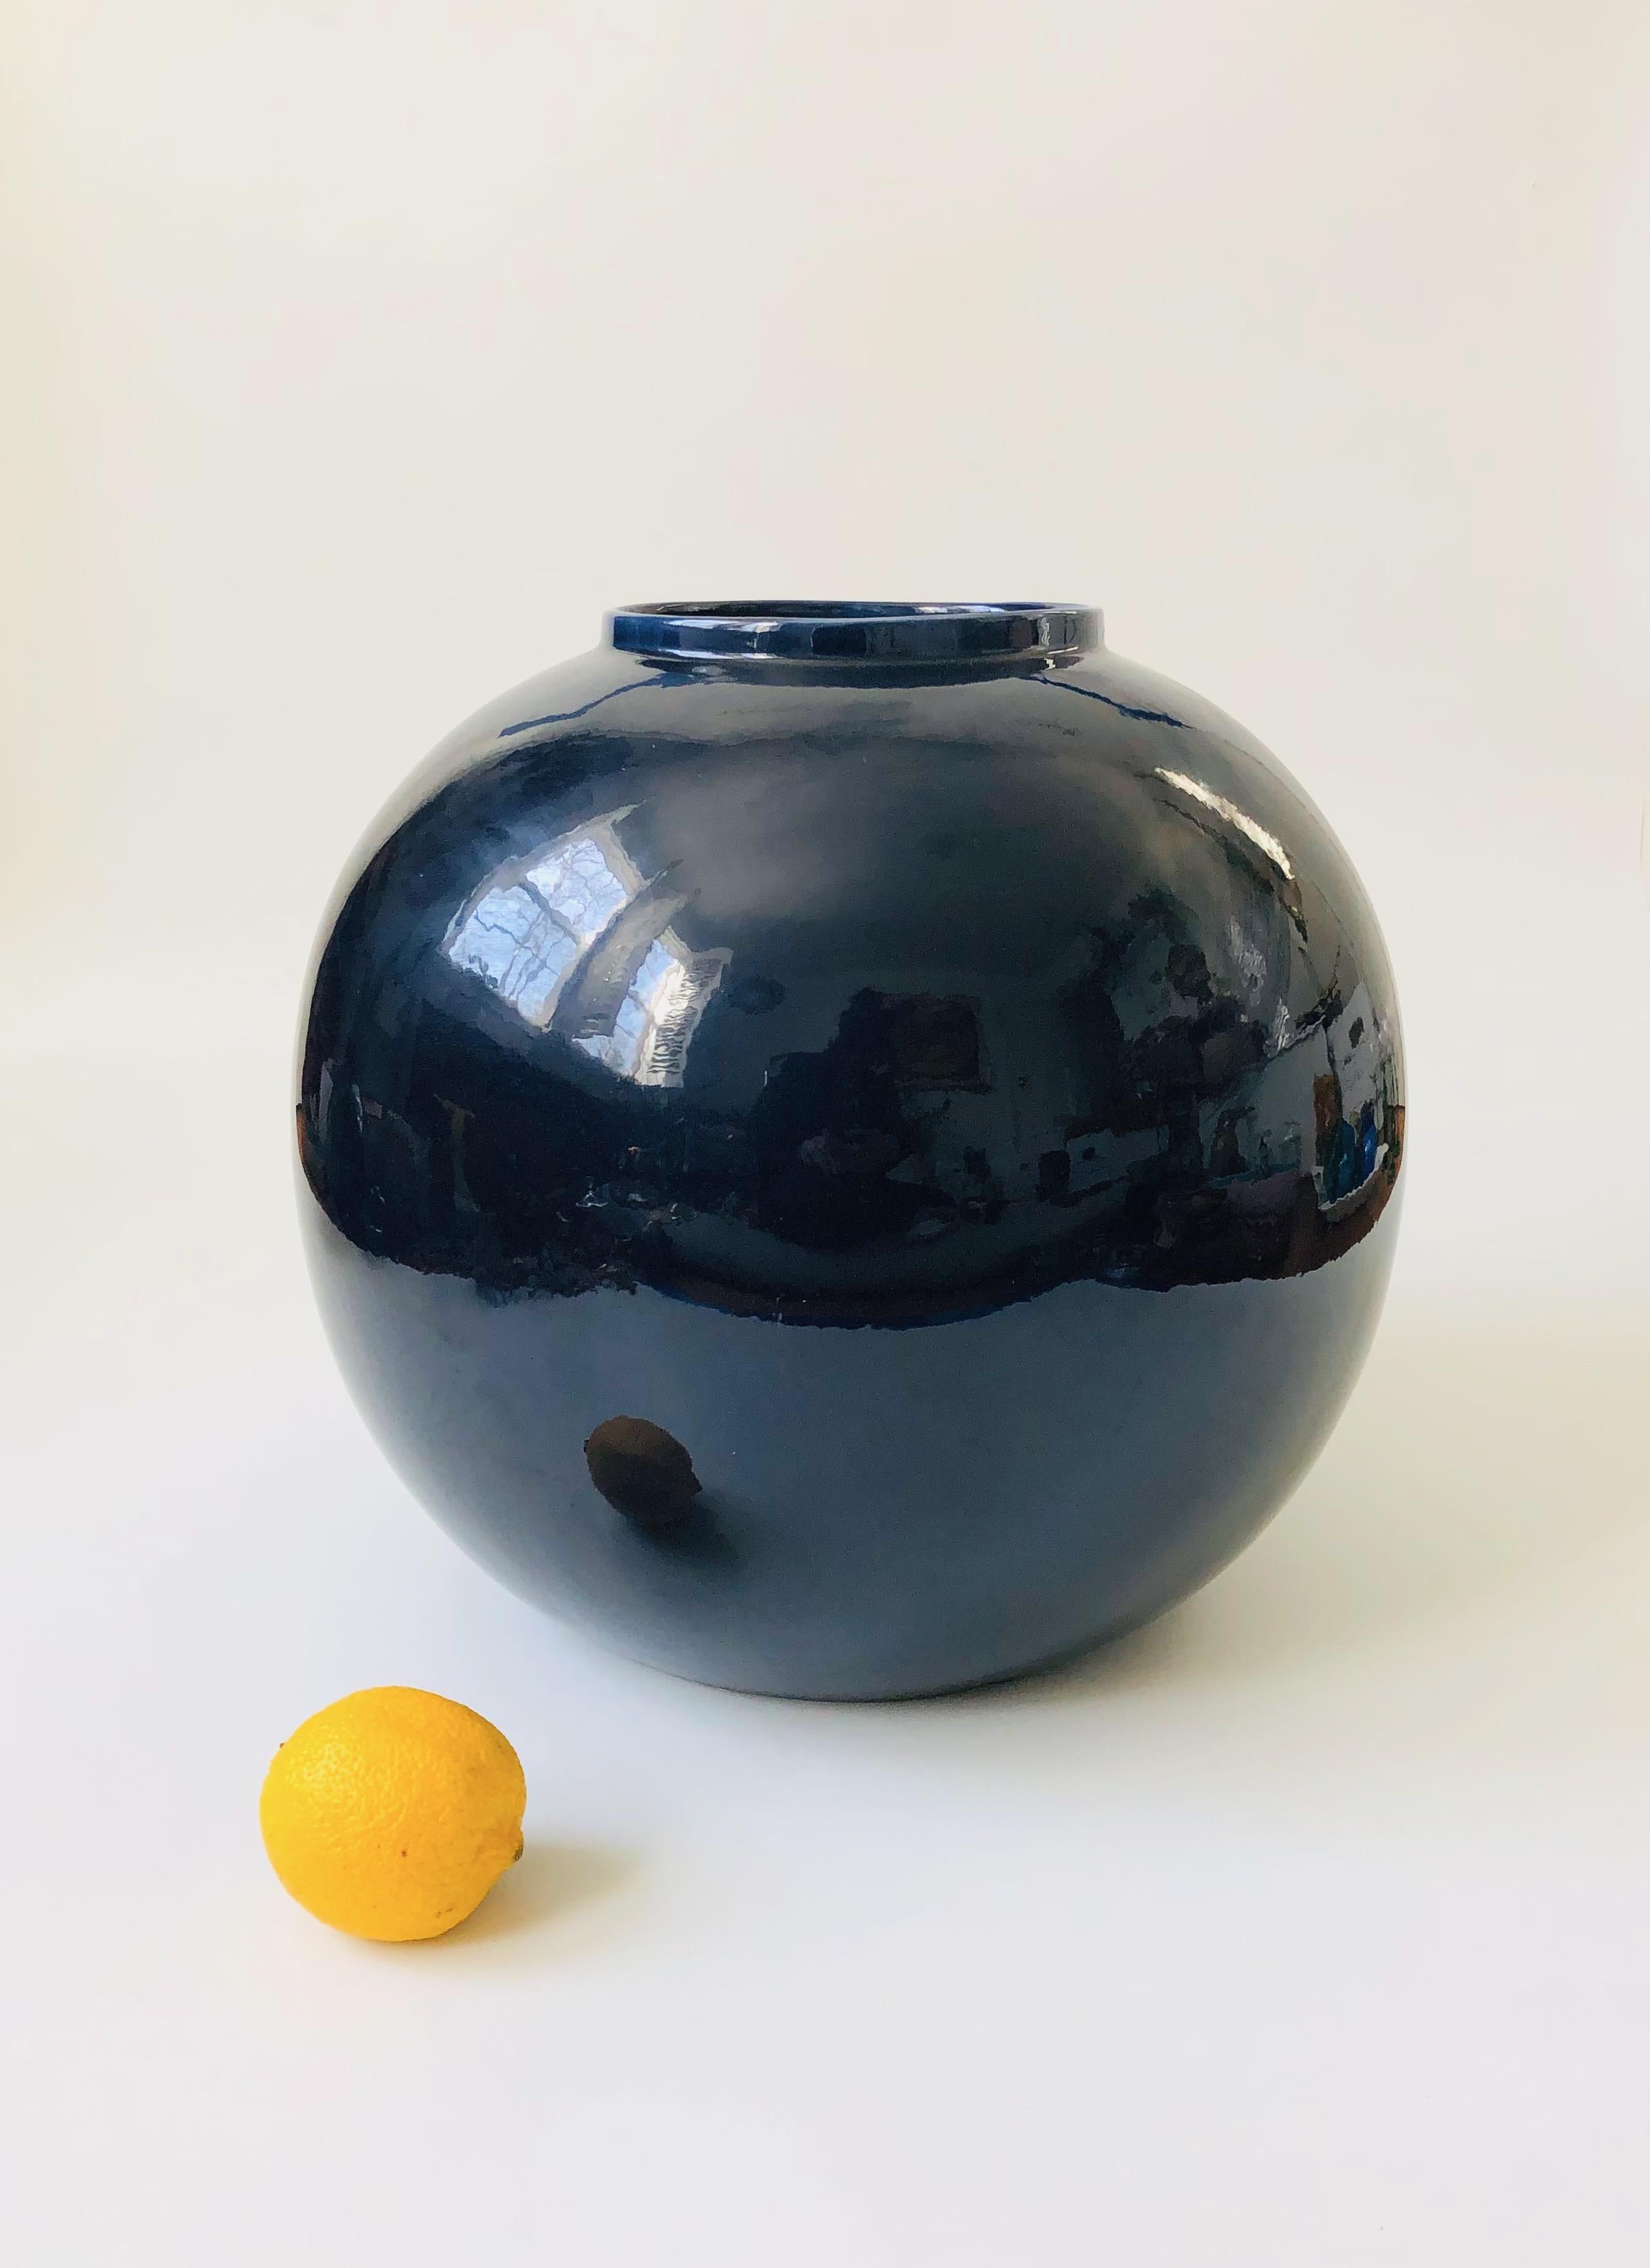 An extra large vintage 80s ceramic sphere vase. High gloss dark blue finish in a simple modern shape. Marked on the base by Jaru and dated 1981. Would work well as a floor vase.
 